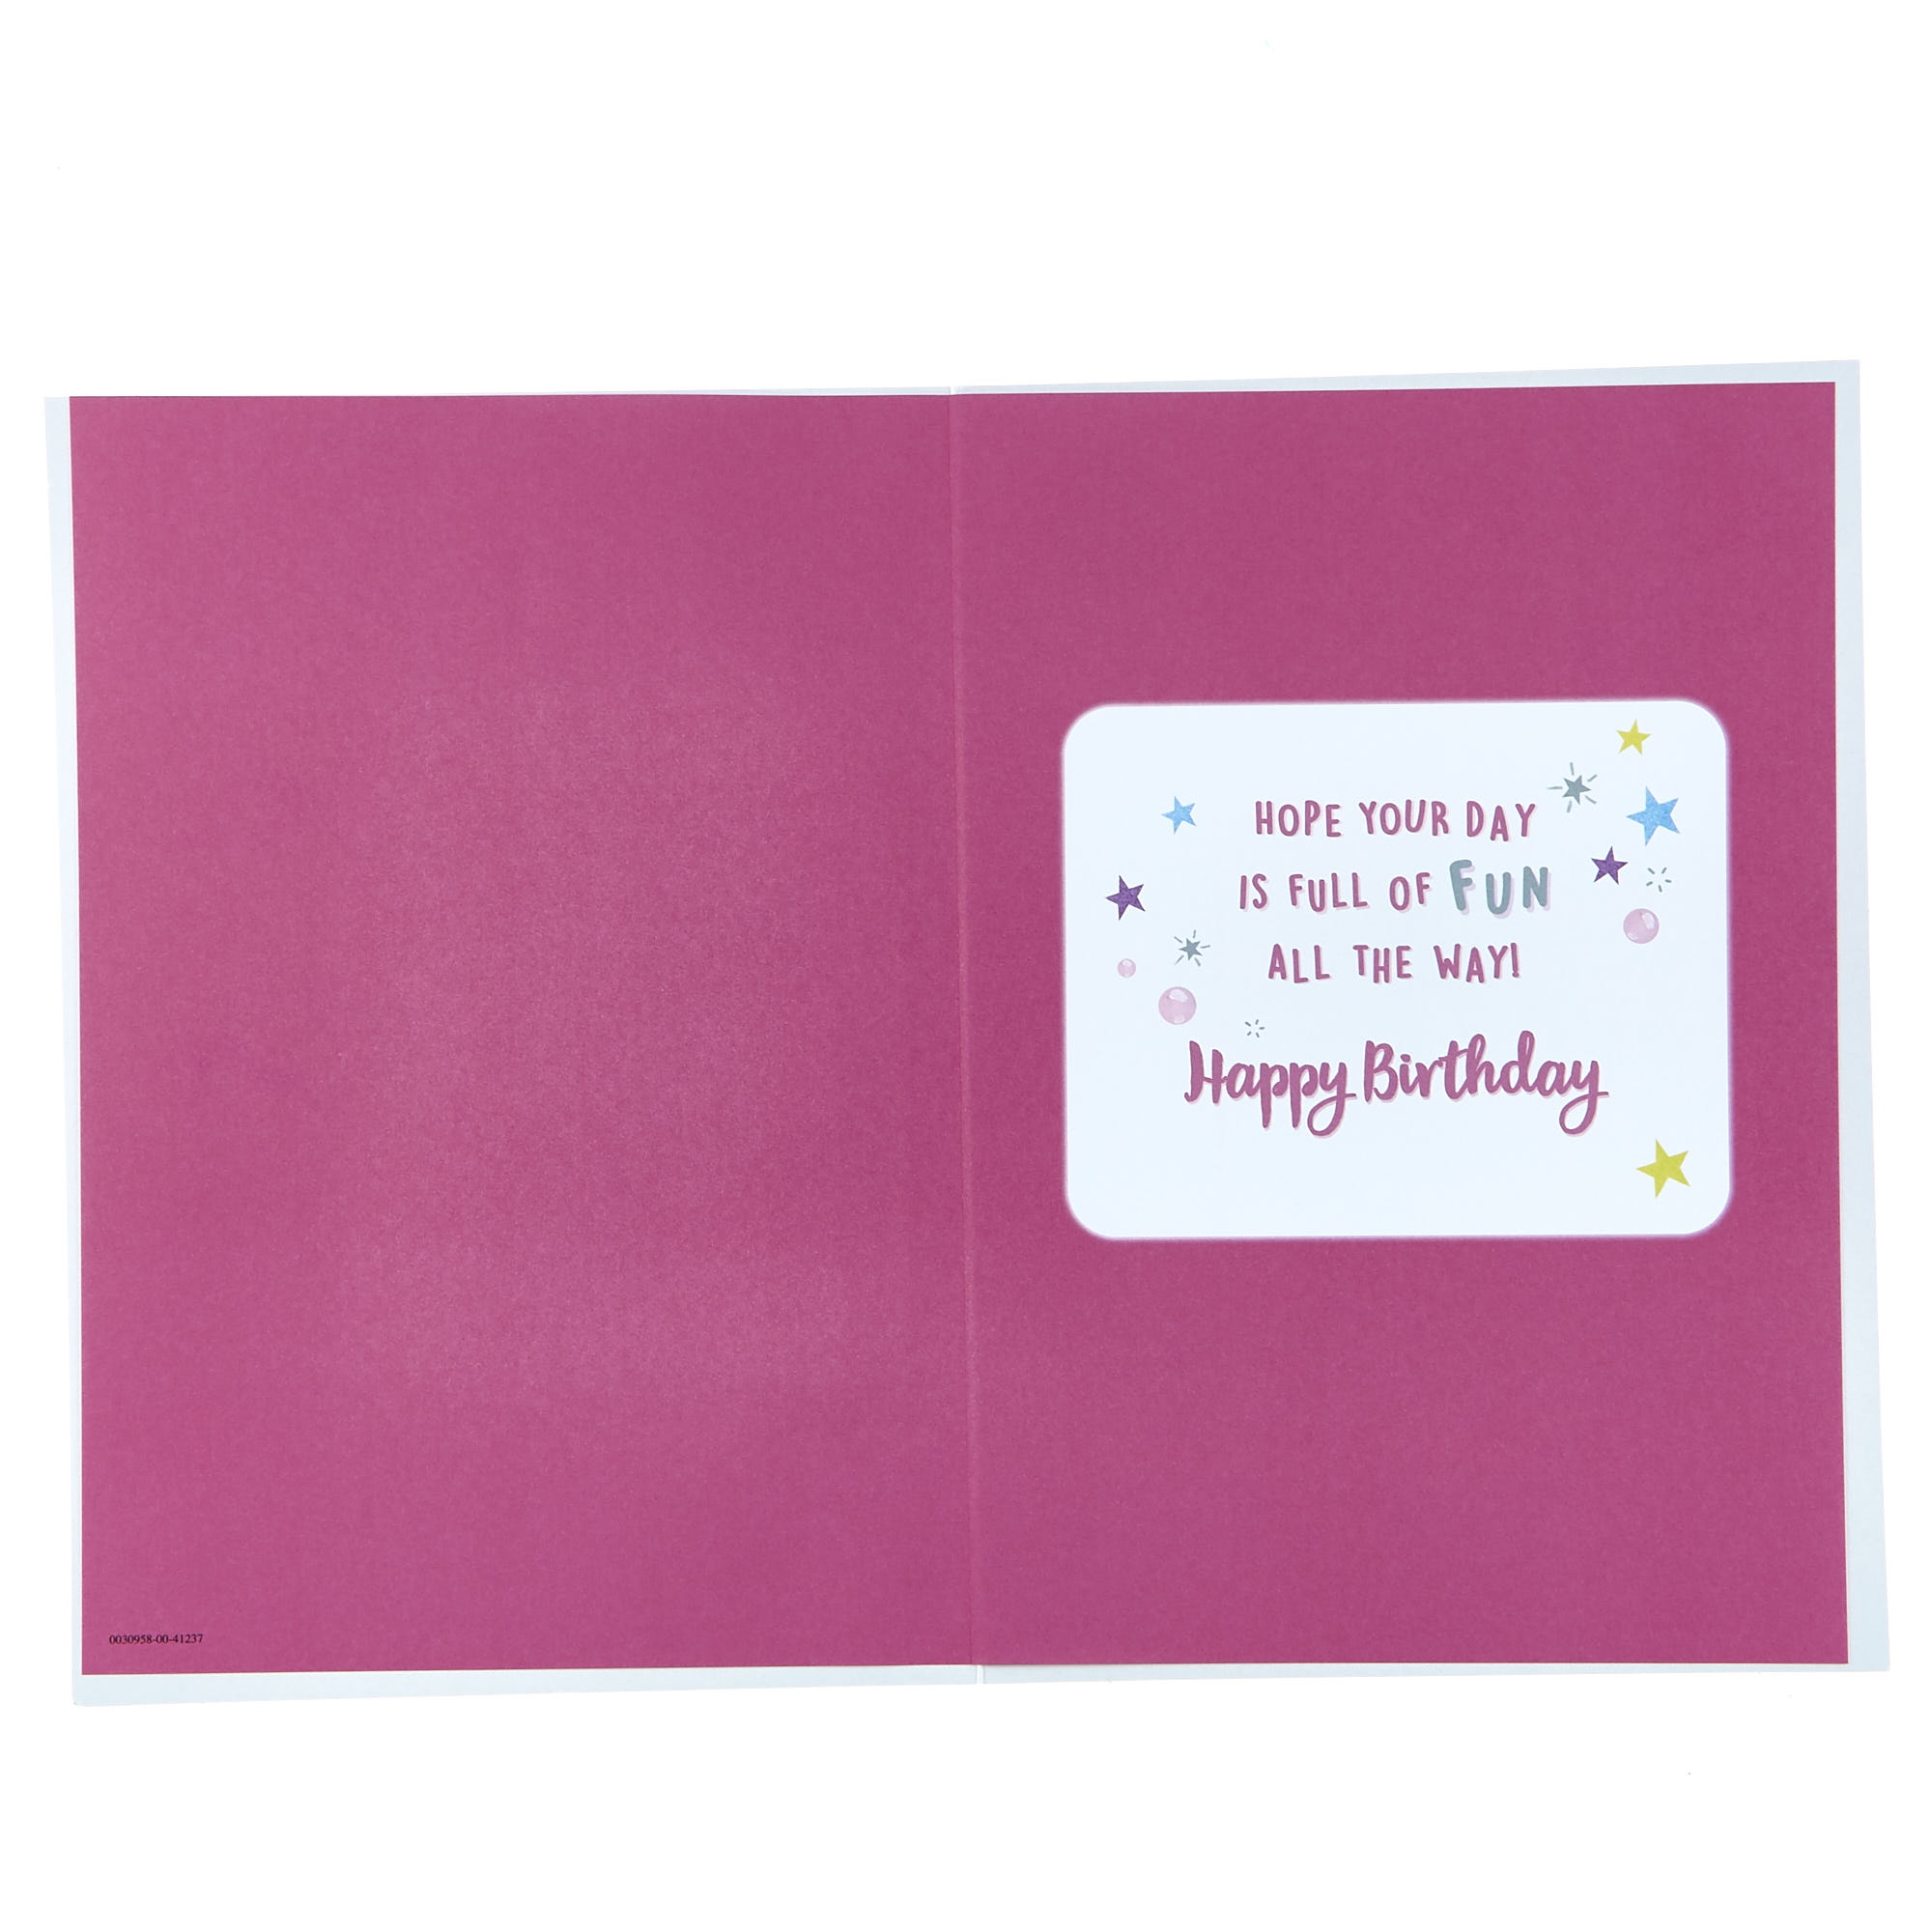 Buy Birthday Card - To An Awesome Niece for GBP 0.99 | Card Factory UK